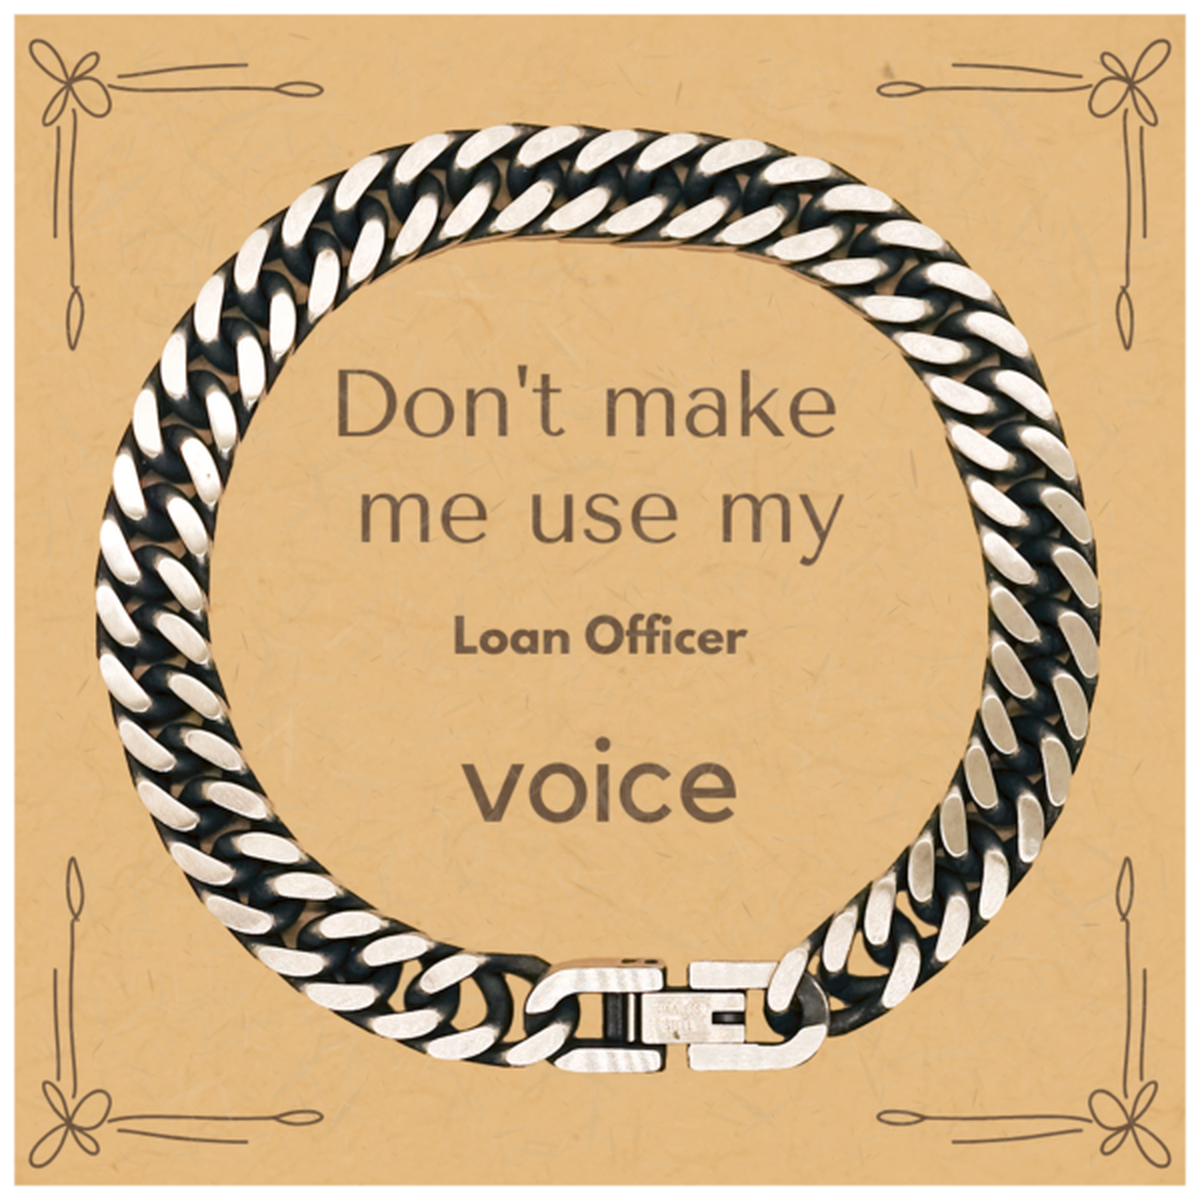 Don't make me use my Loan Officer voice, Sarcasm Loan Officer Card Gifts, Christmas Loan Officer Cuban Link Chain Bracelet Birthday Unique Gifts For Loan Officer Coworkers, Men, Women, Colleague, Friends